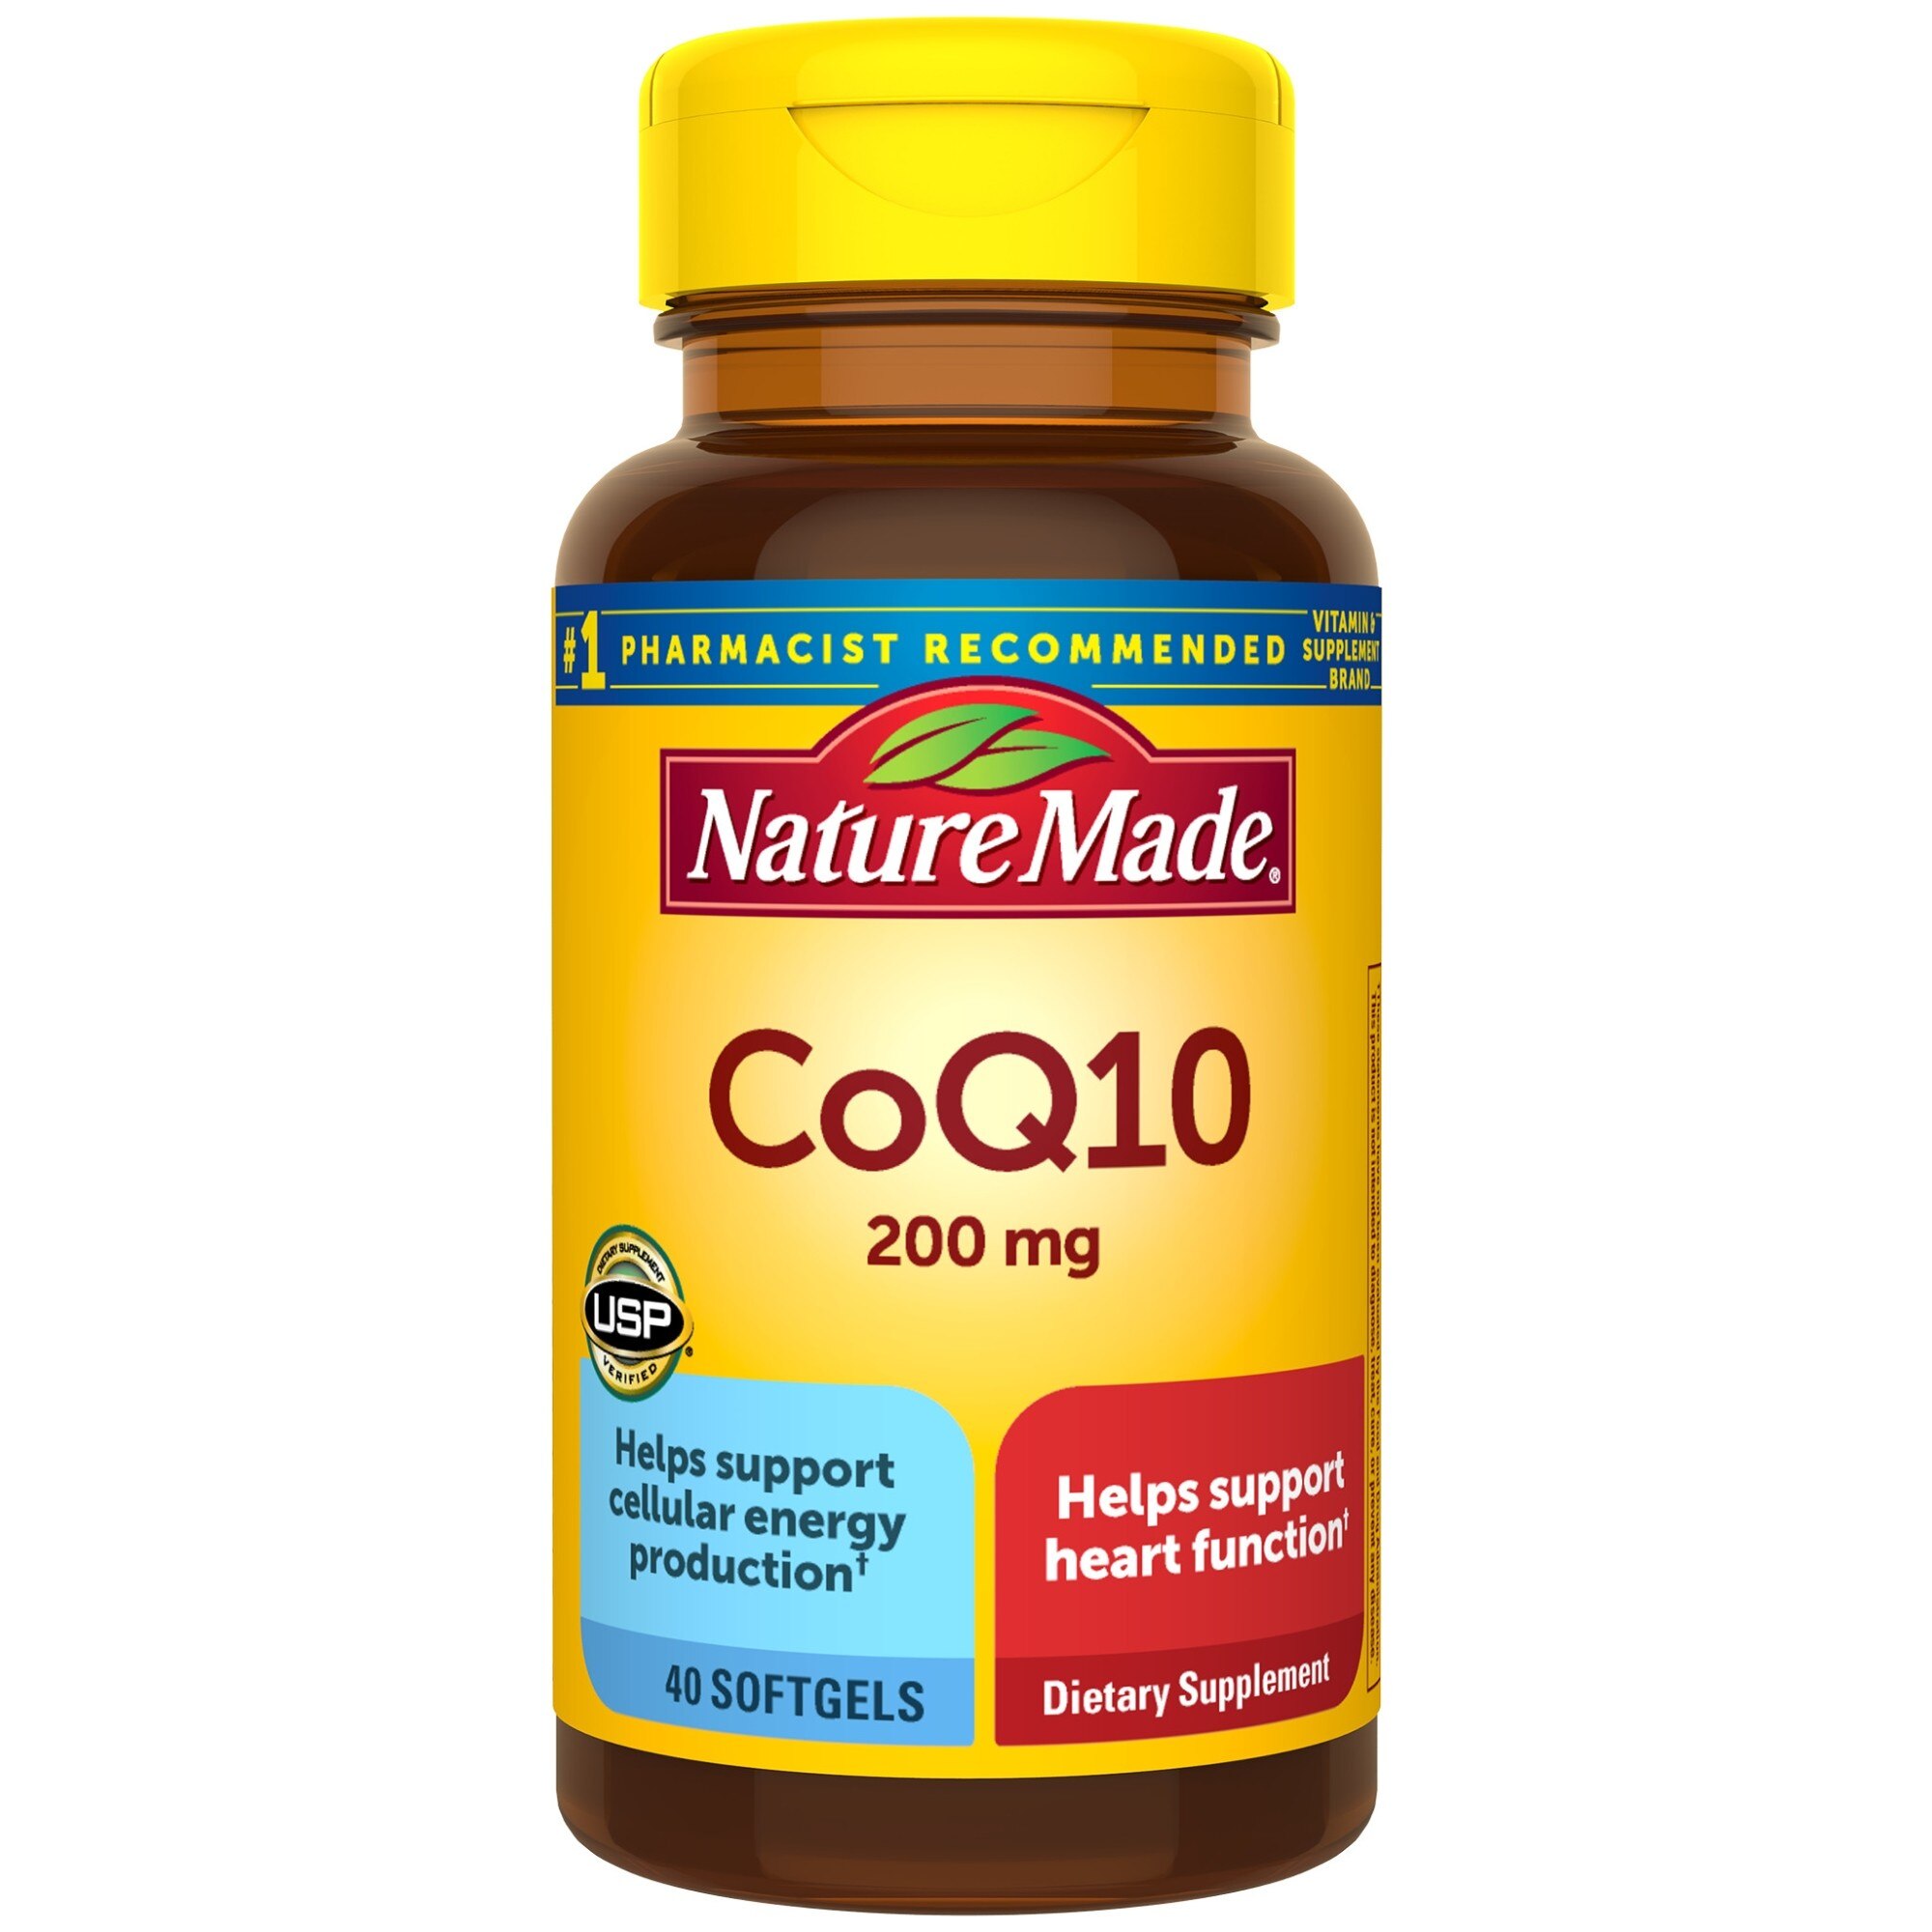 Nature Made CoQ10 200 mg Heart Health Support Softgels, 40 CT